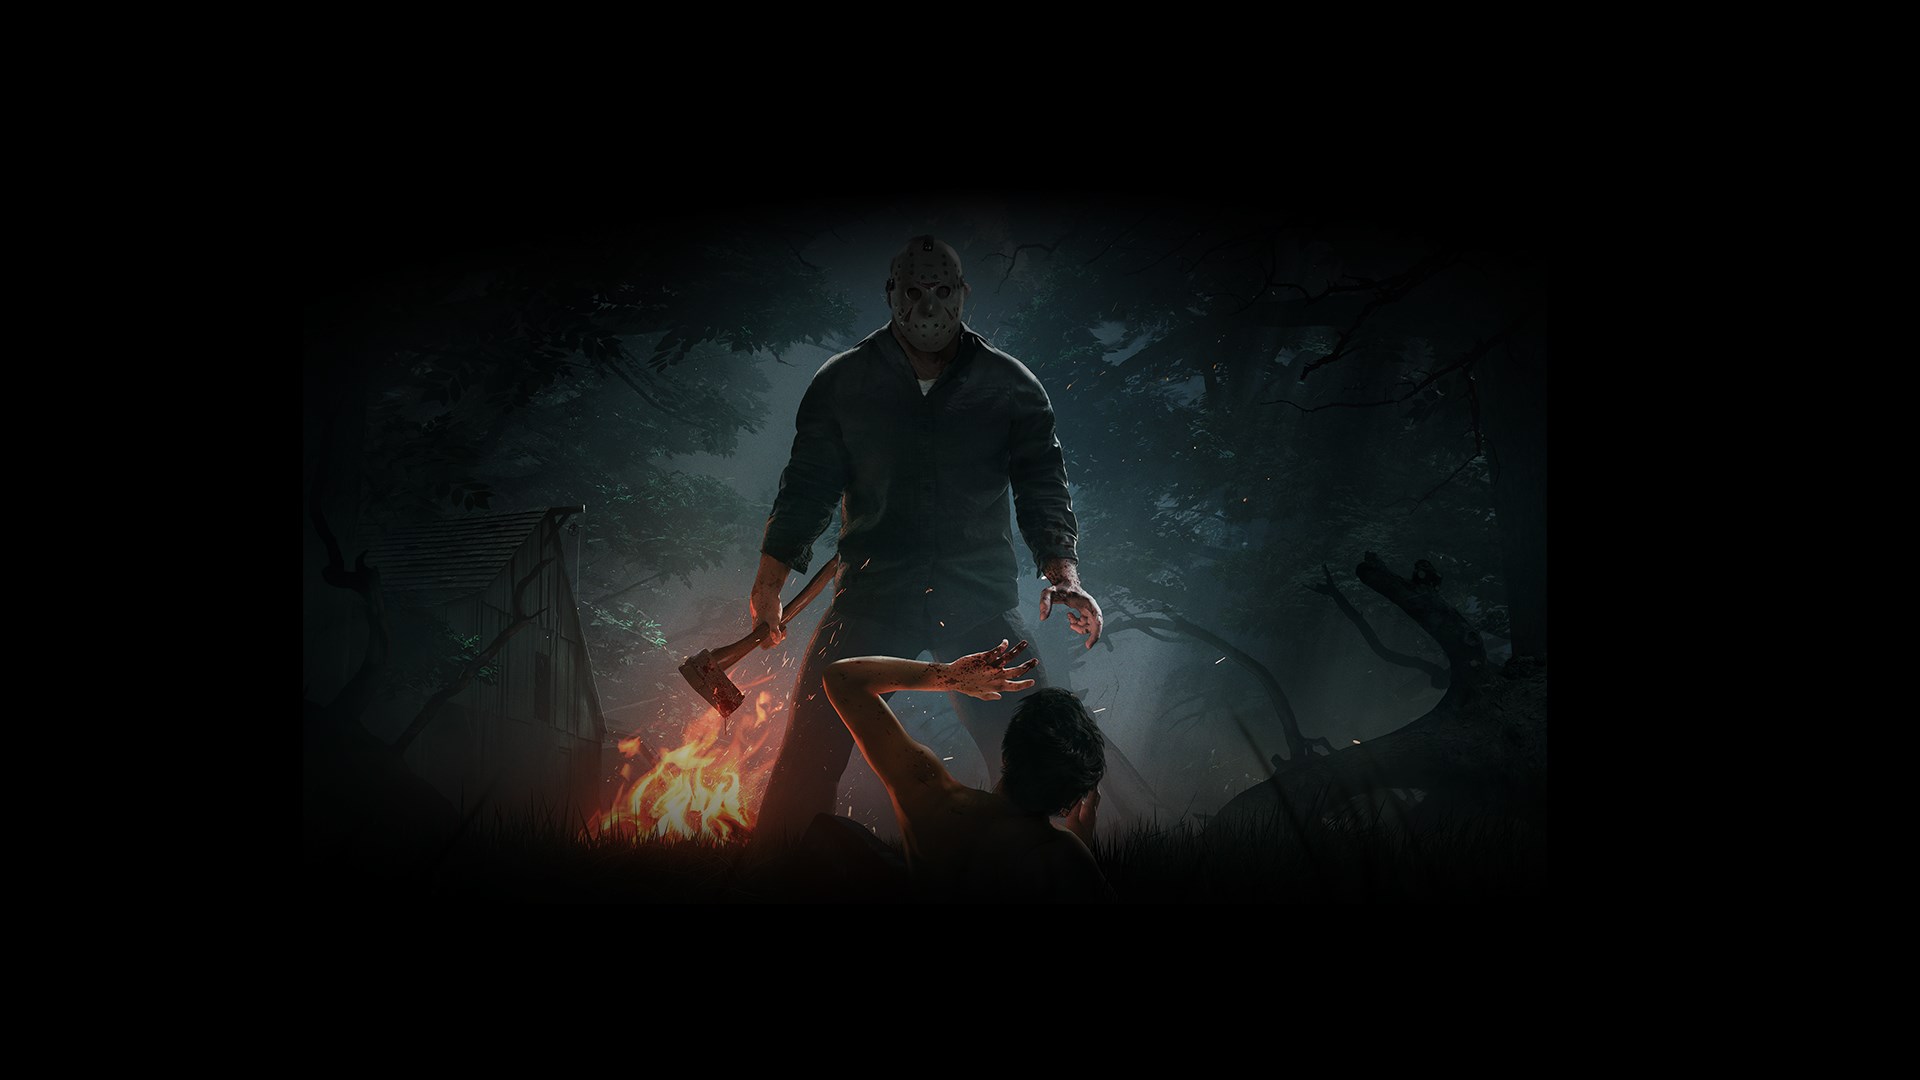 Jason returns as Friday the 13th: The Game arrives on Xbox One, PS4 and PC